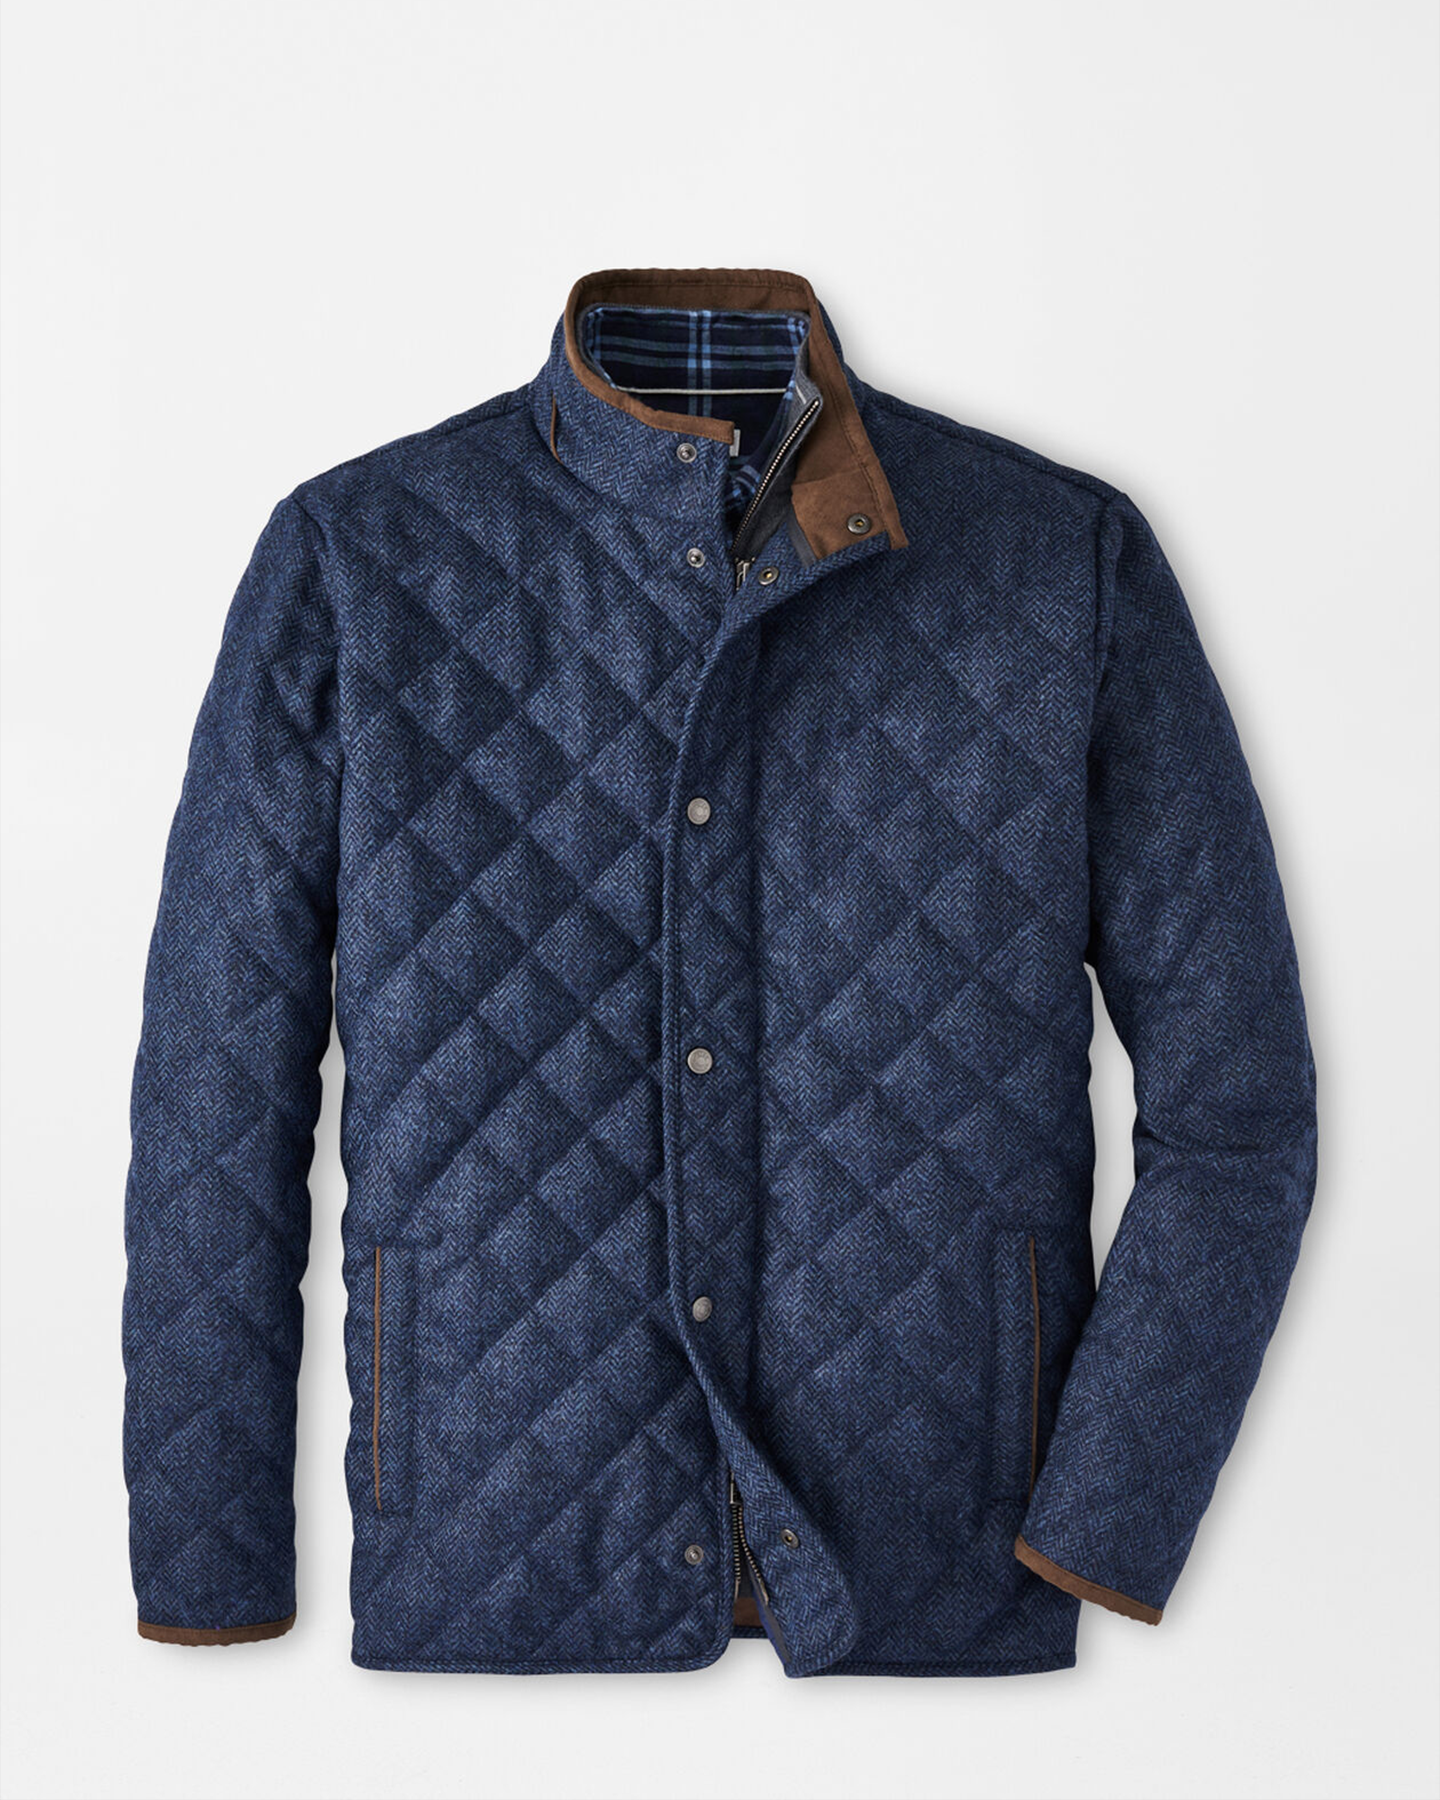 SUFFOLK QUILTED WOOL TRAVEL COAT - STAR DUST